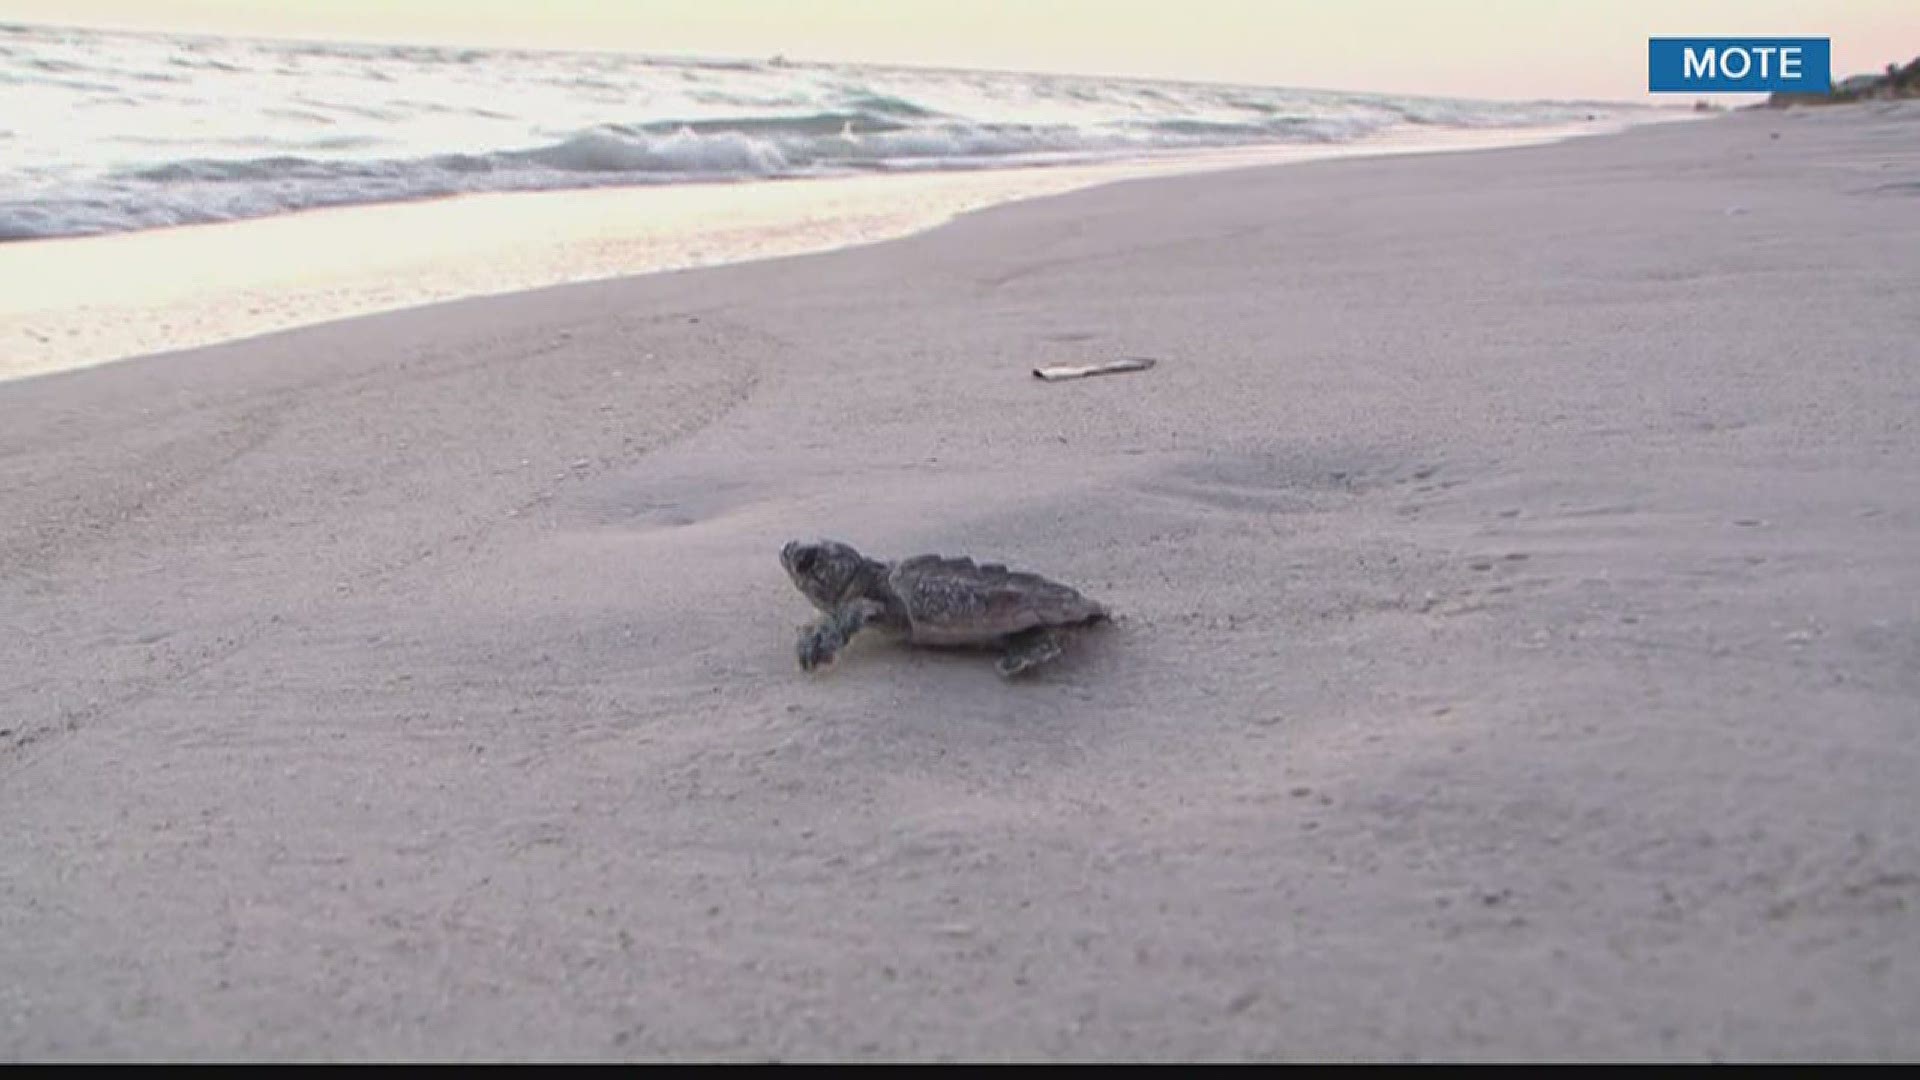 It’s sea turtle nesting season in Tampa Bay, and in some areas, more nests are being reported than normal.